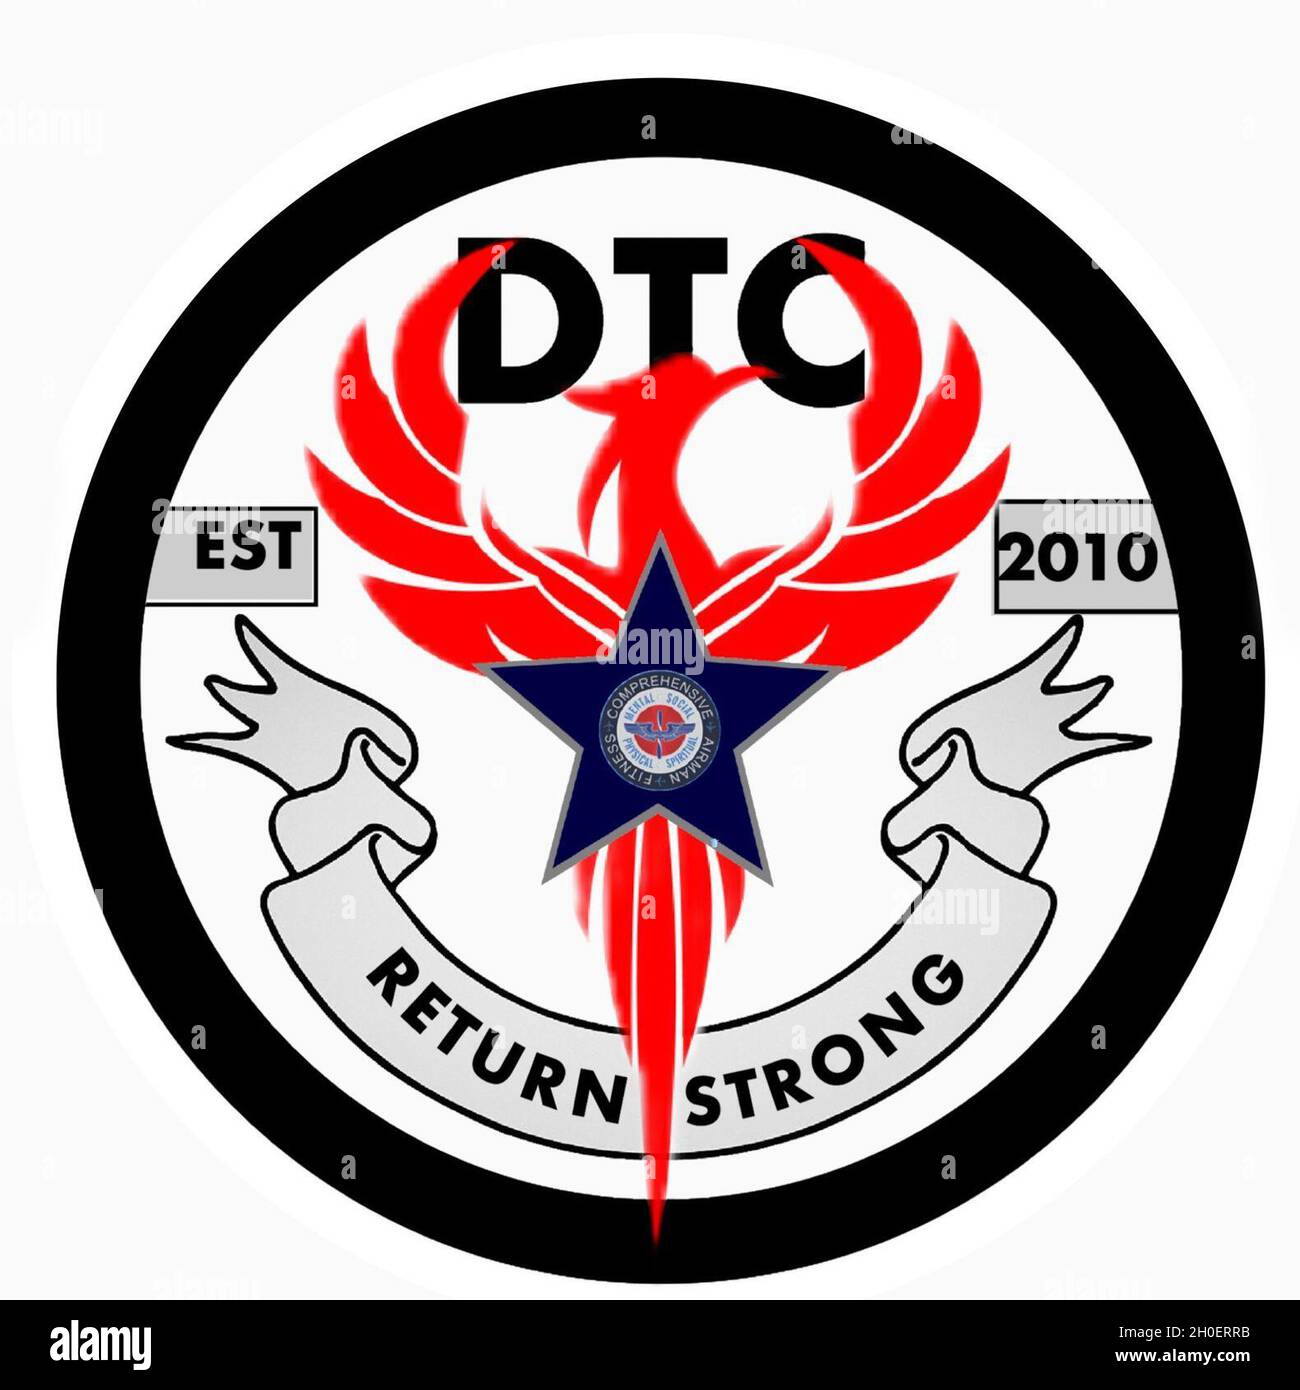 The Deployment Transition Center allows deployers returning home to relax  and discuss their recent deployment. The DTC's emblem depicts a phoenix and  the Comprehensive Airman Fitness logo. The DTC was established in